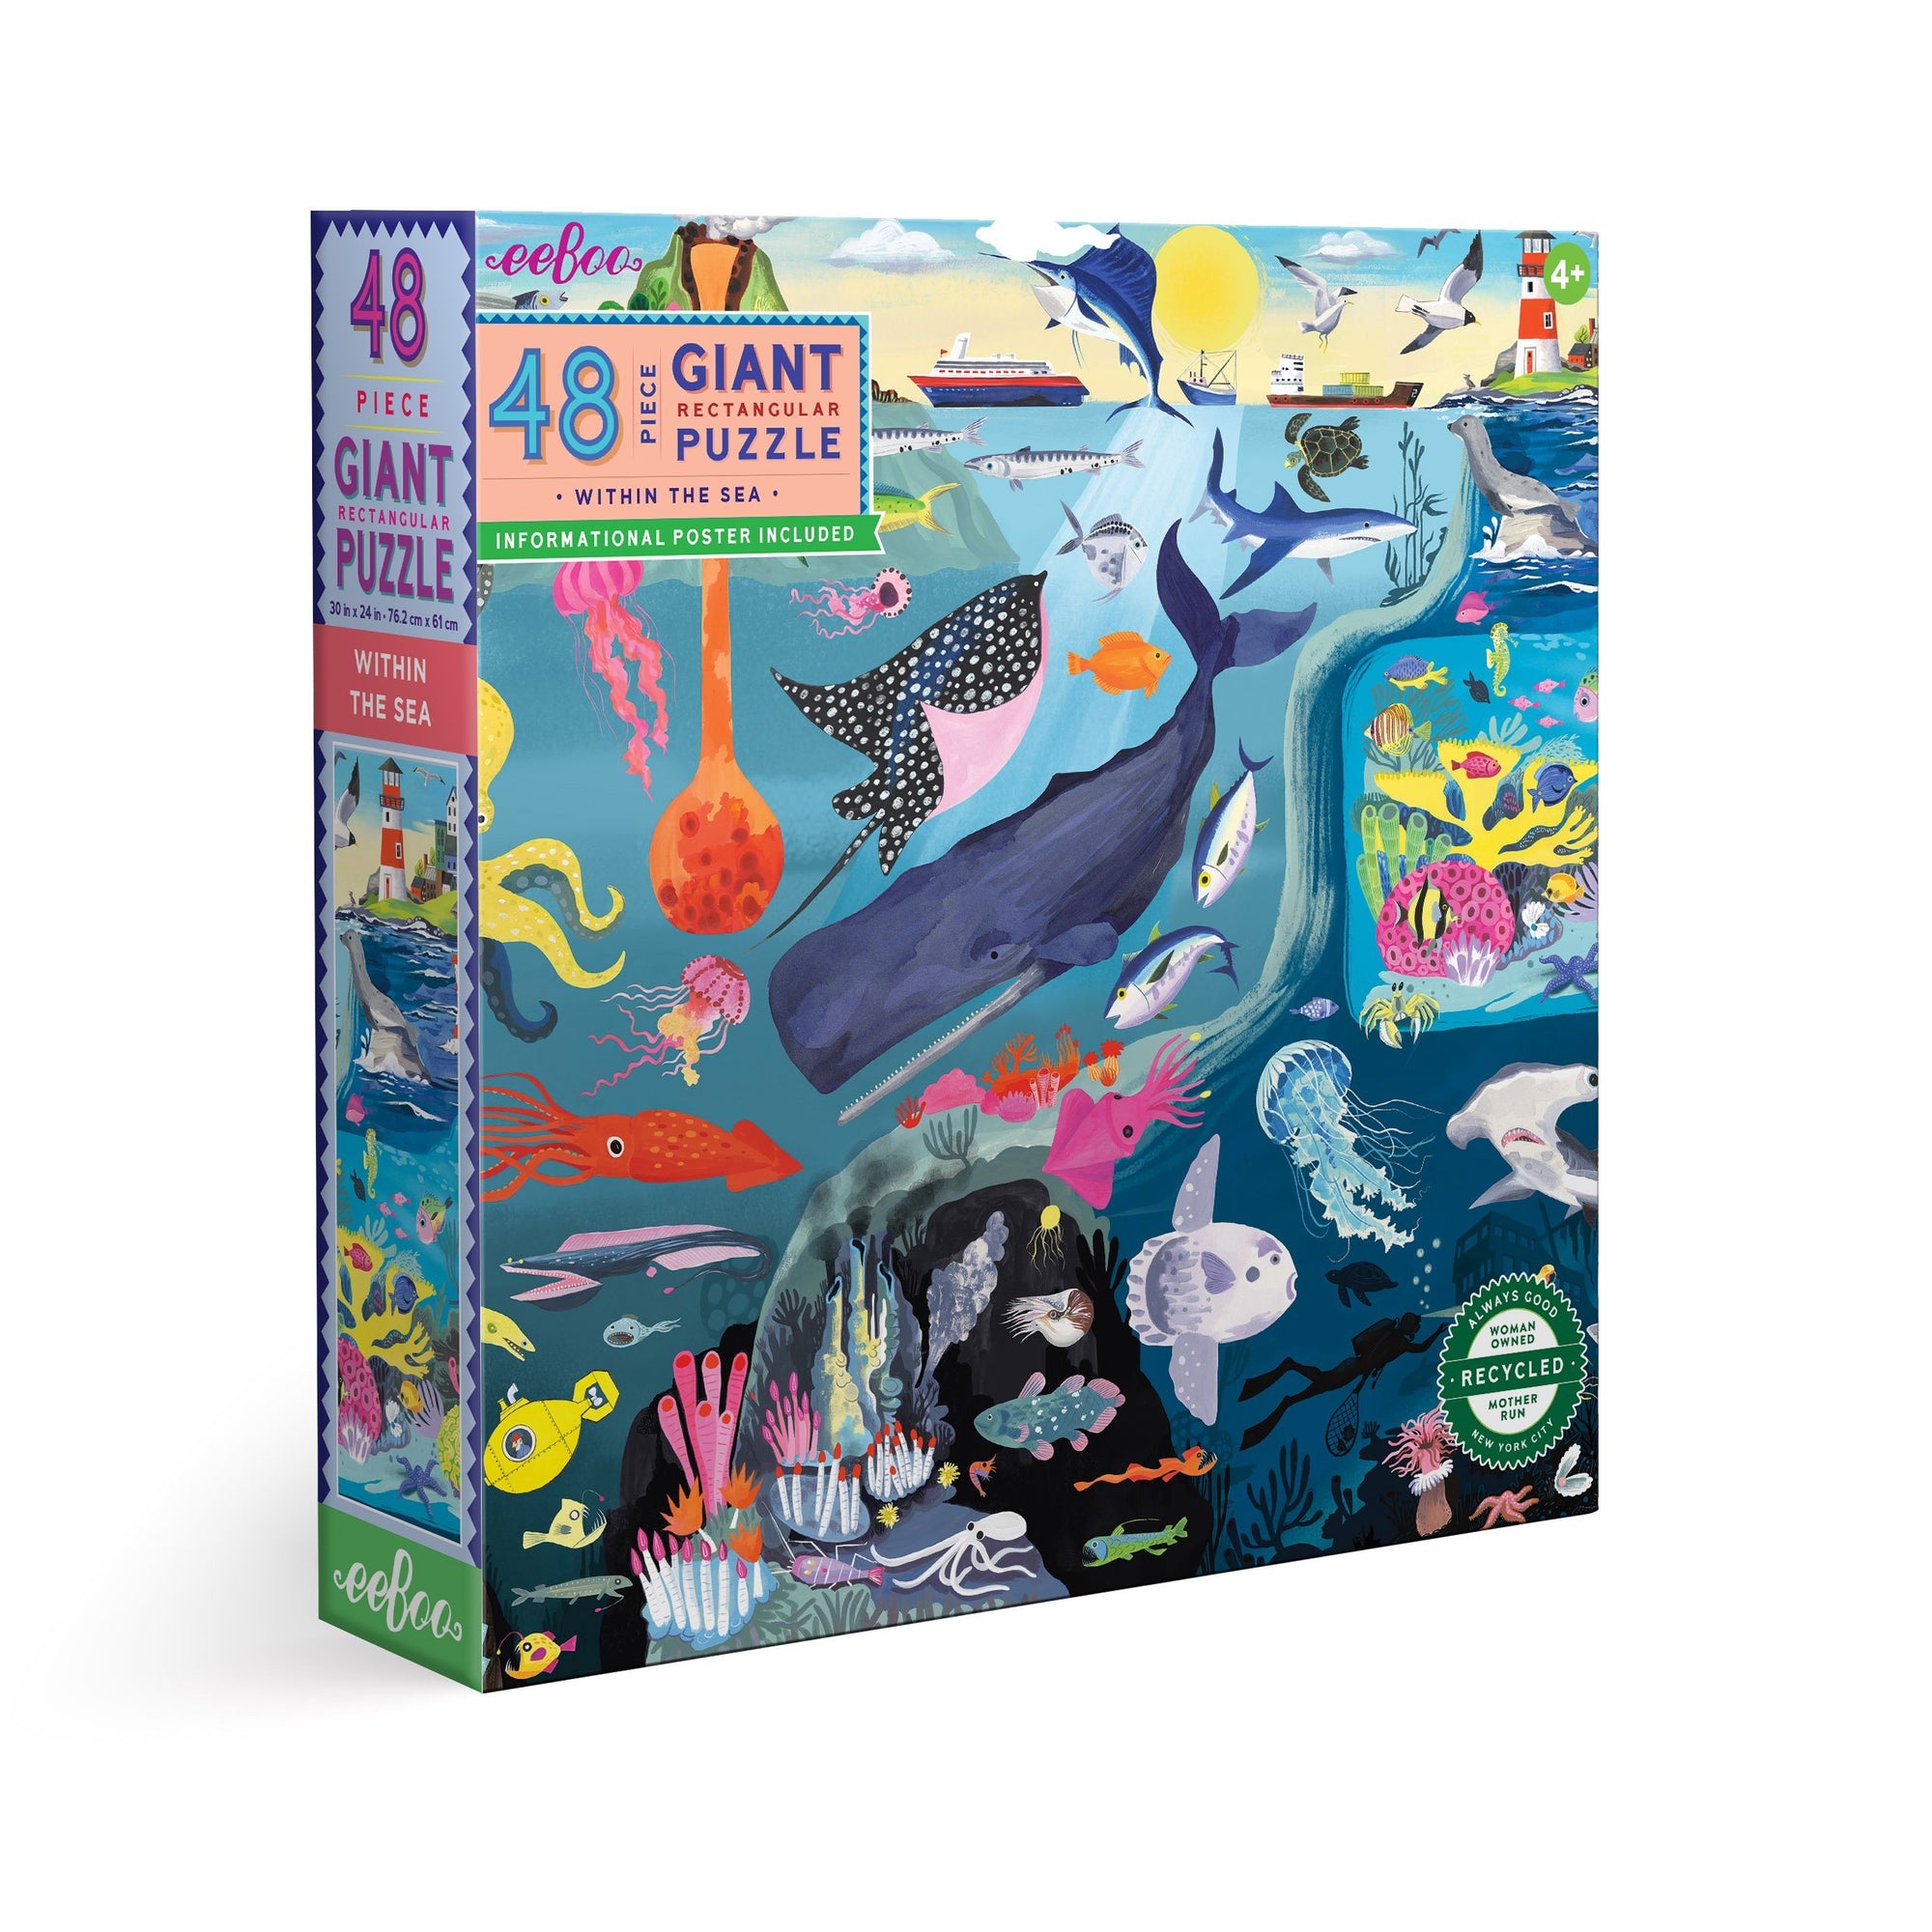 48 Piece Giant Puzzle - Within the Sea